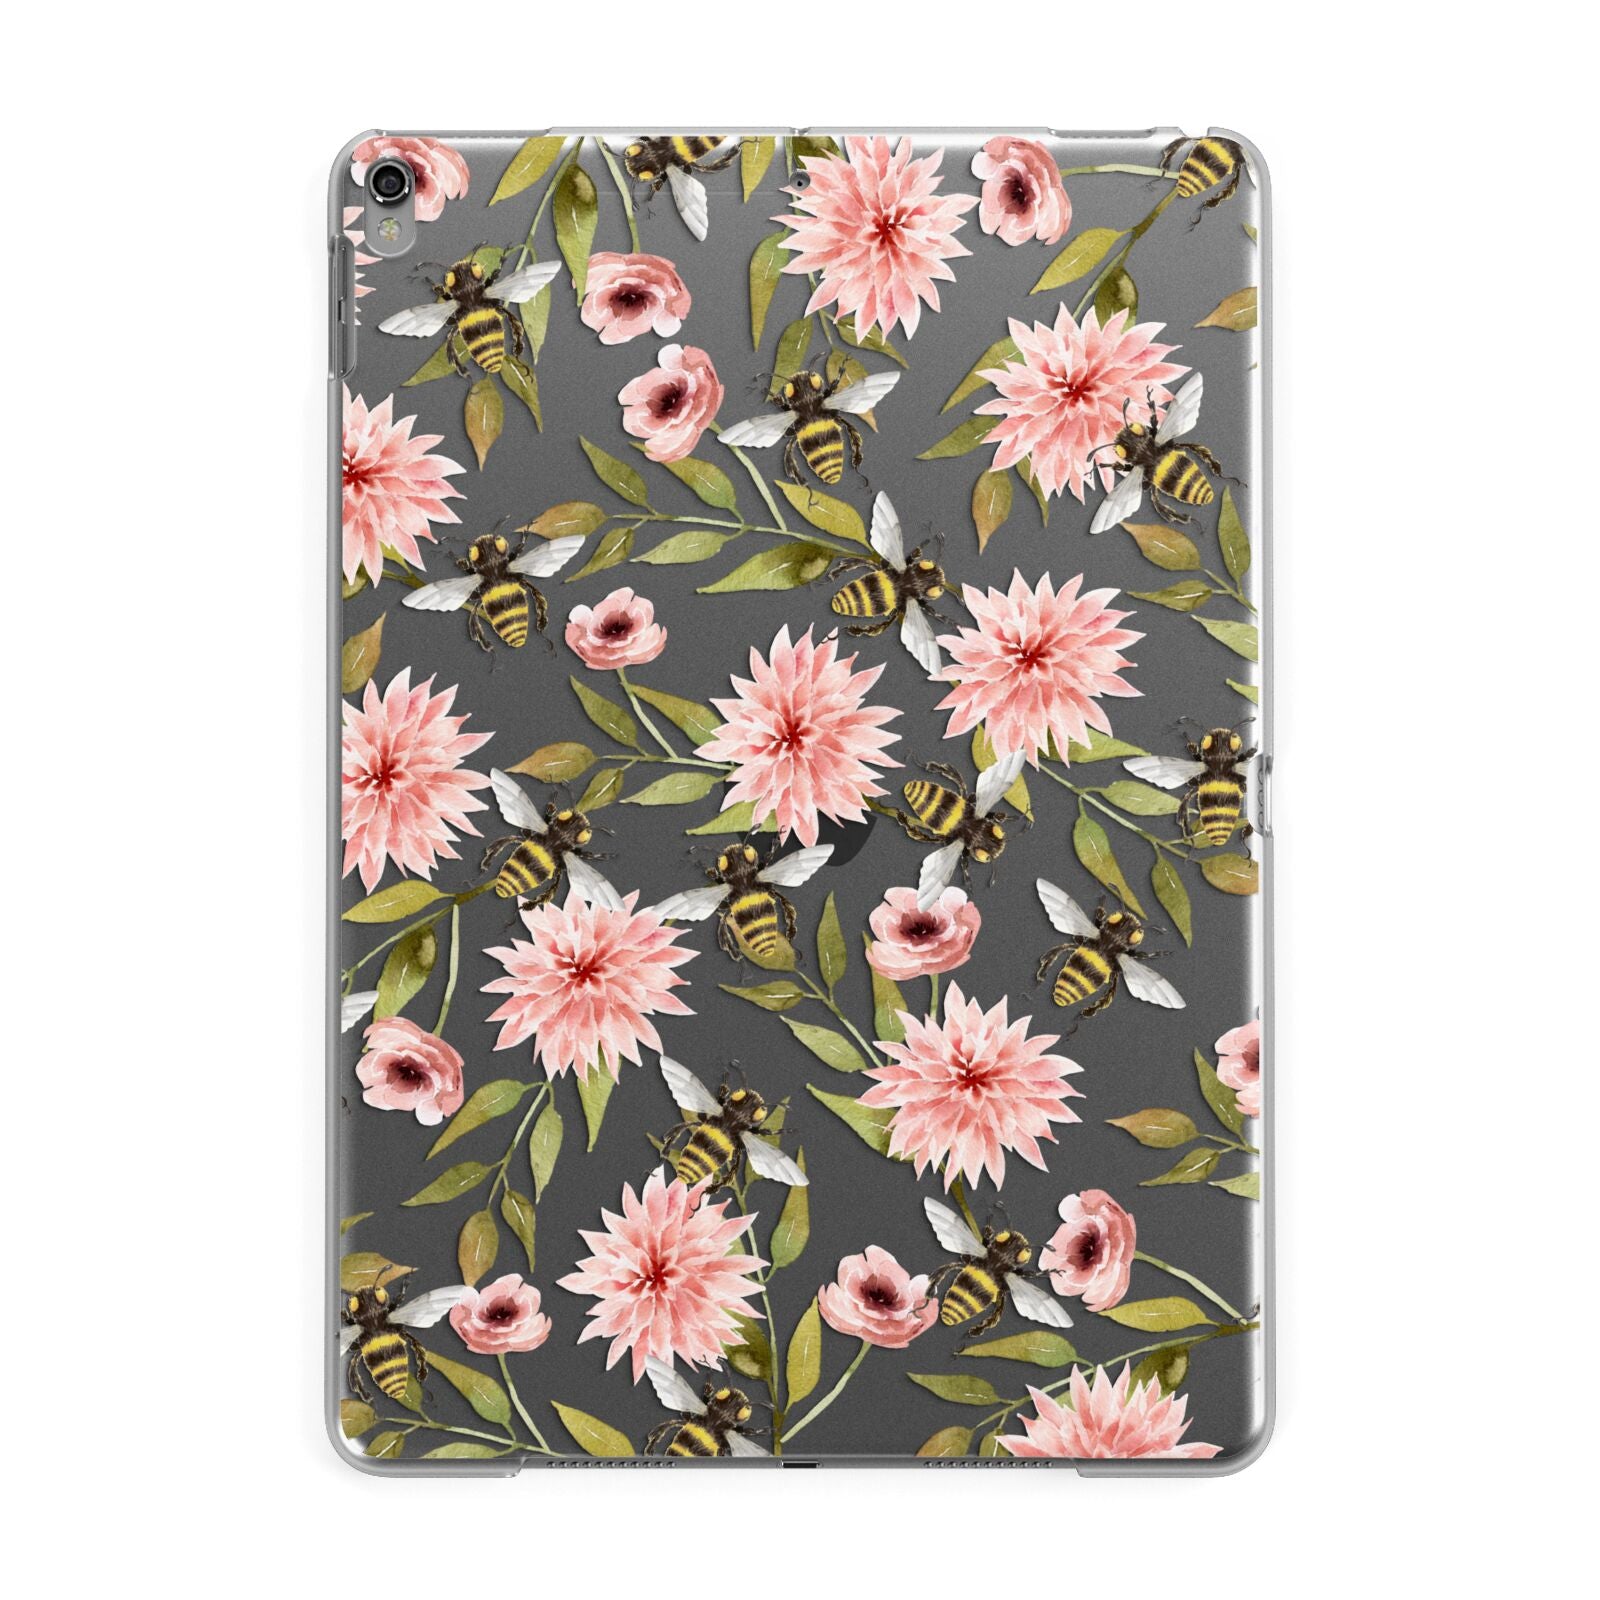 Clear Pink Flowers and Bees Apple iPad Grey Case